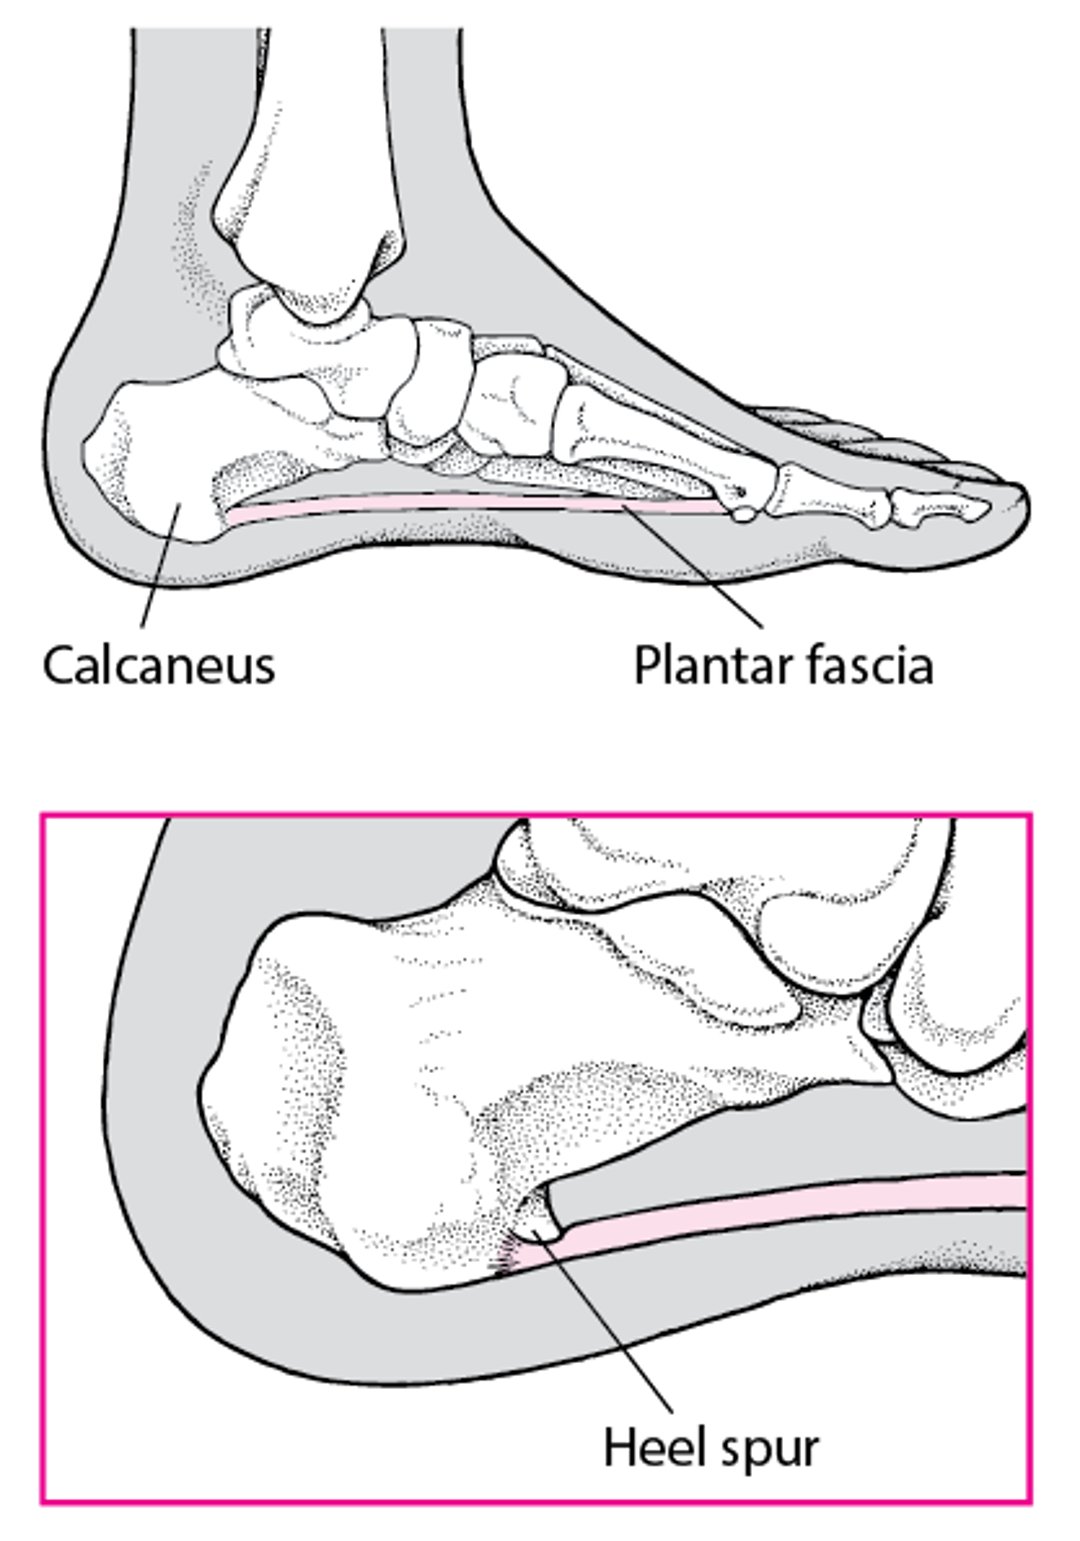 What Is a Heel Spur?